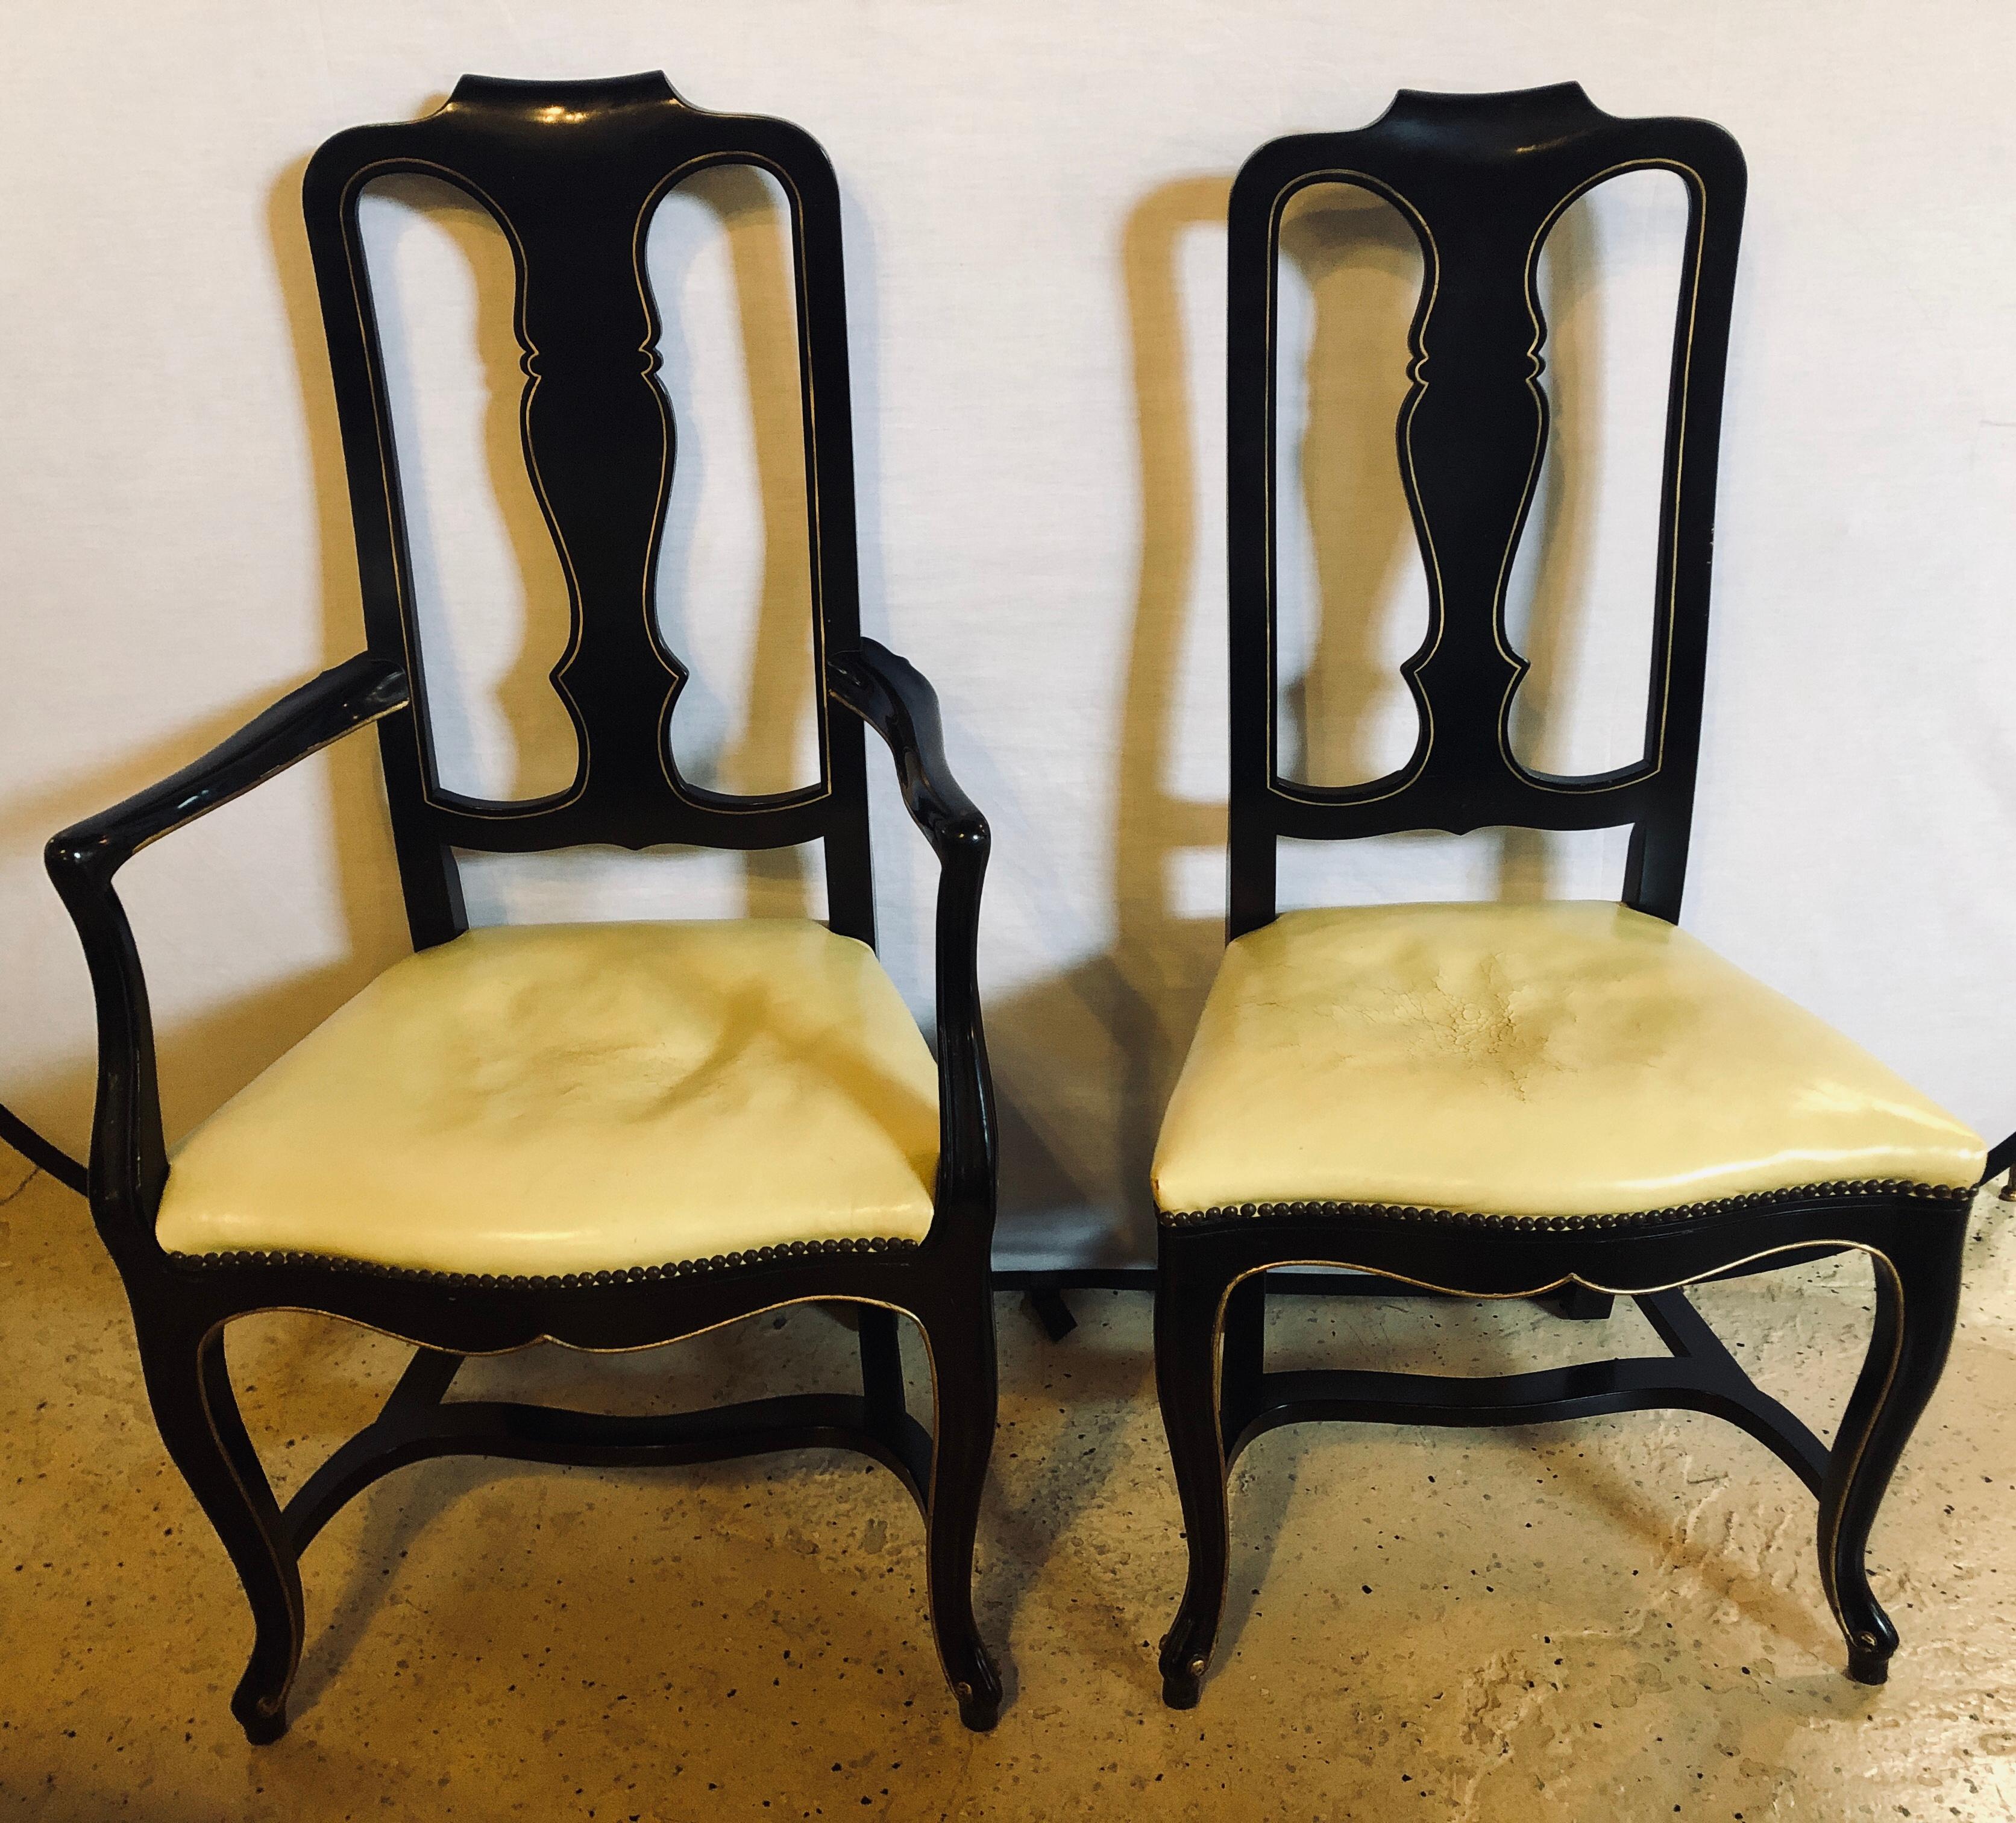 Set of eight Queen Anne style ebonized and gilt decorated dining chairs. These sleek and stylish dining chairs come straight from a NYC brownstone. The ebonized frames would fit easily in any Mid-Century Modern or Hollywood Regency setting.
$800